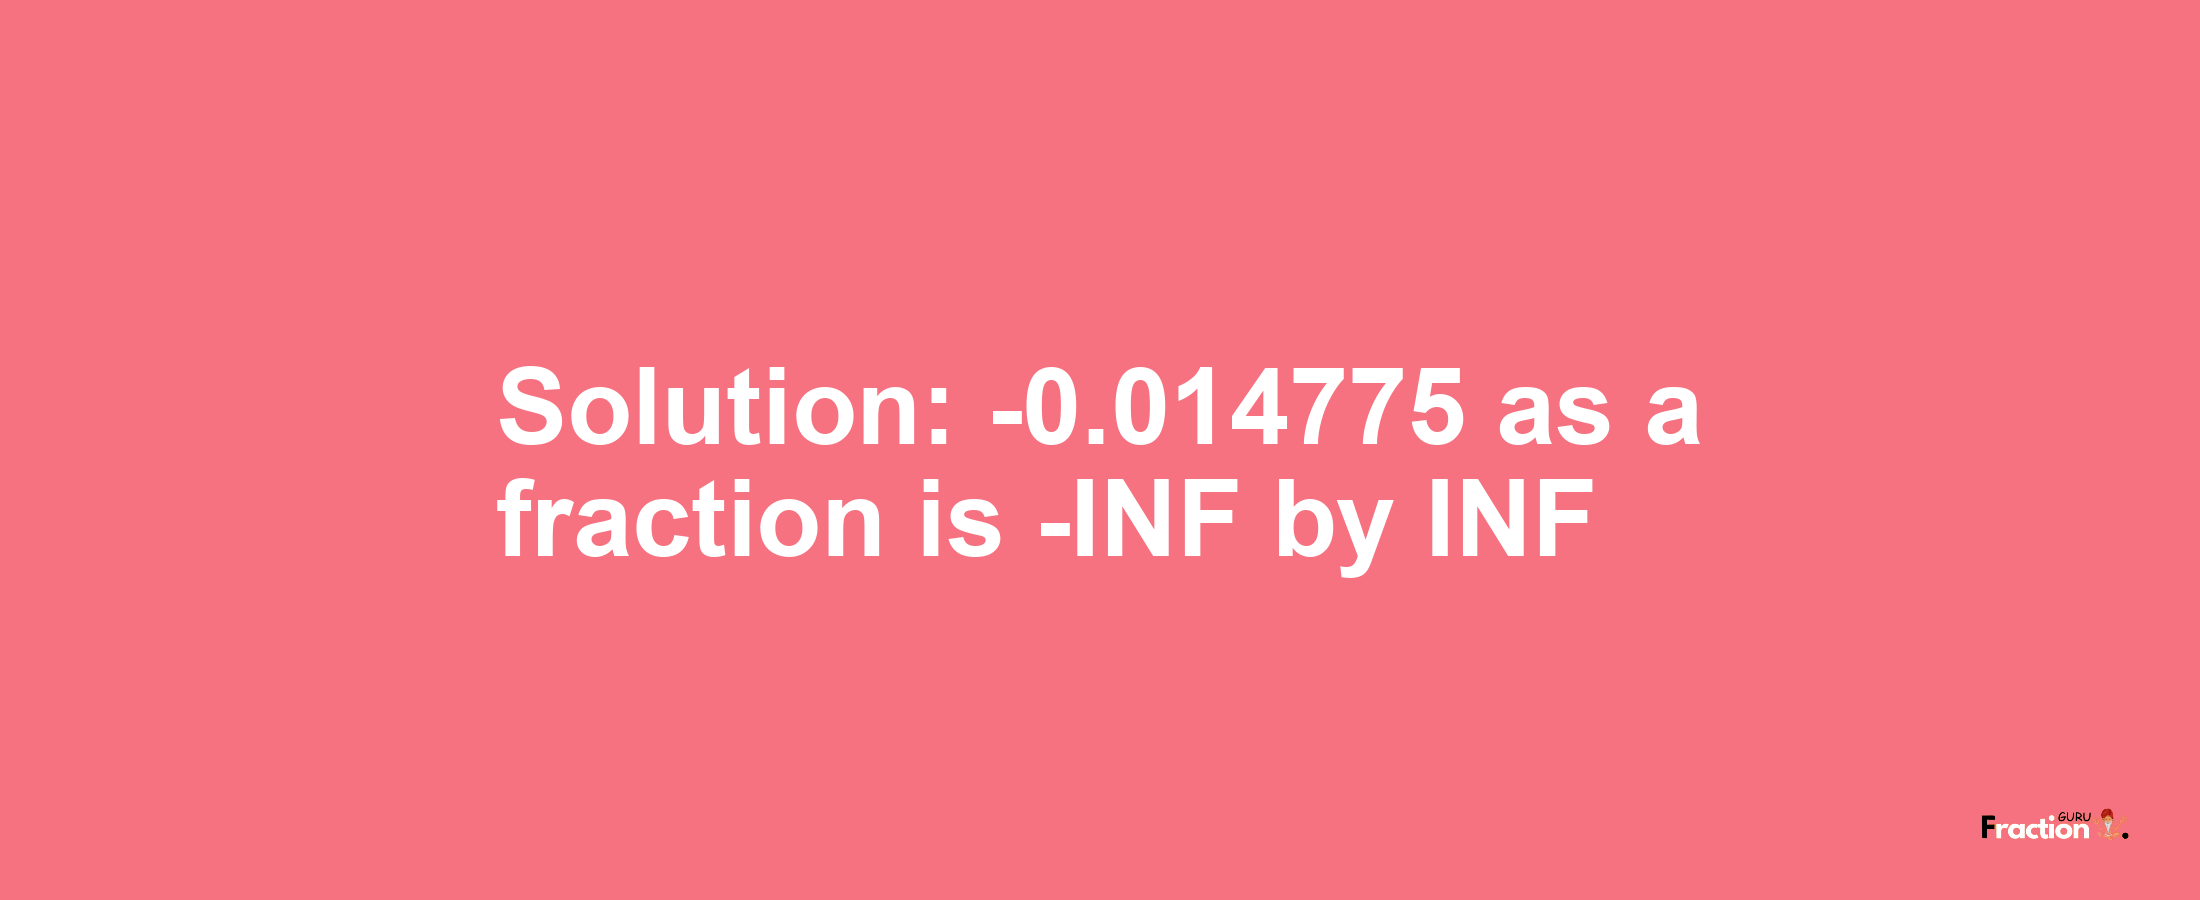 Solution:-0.014775 as a fraction is -INF/INF